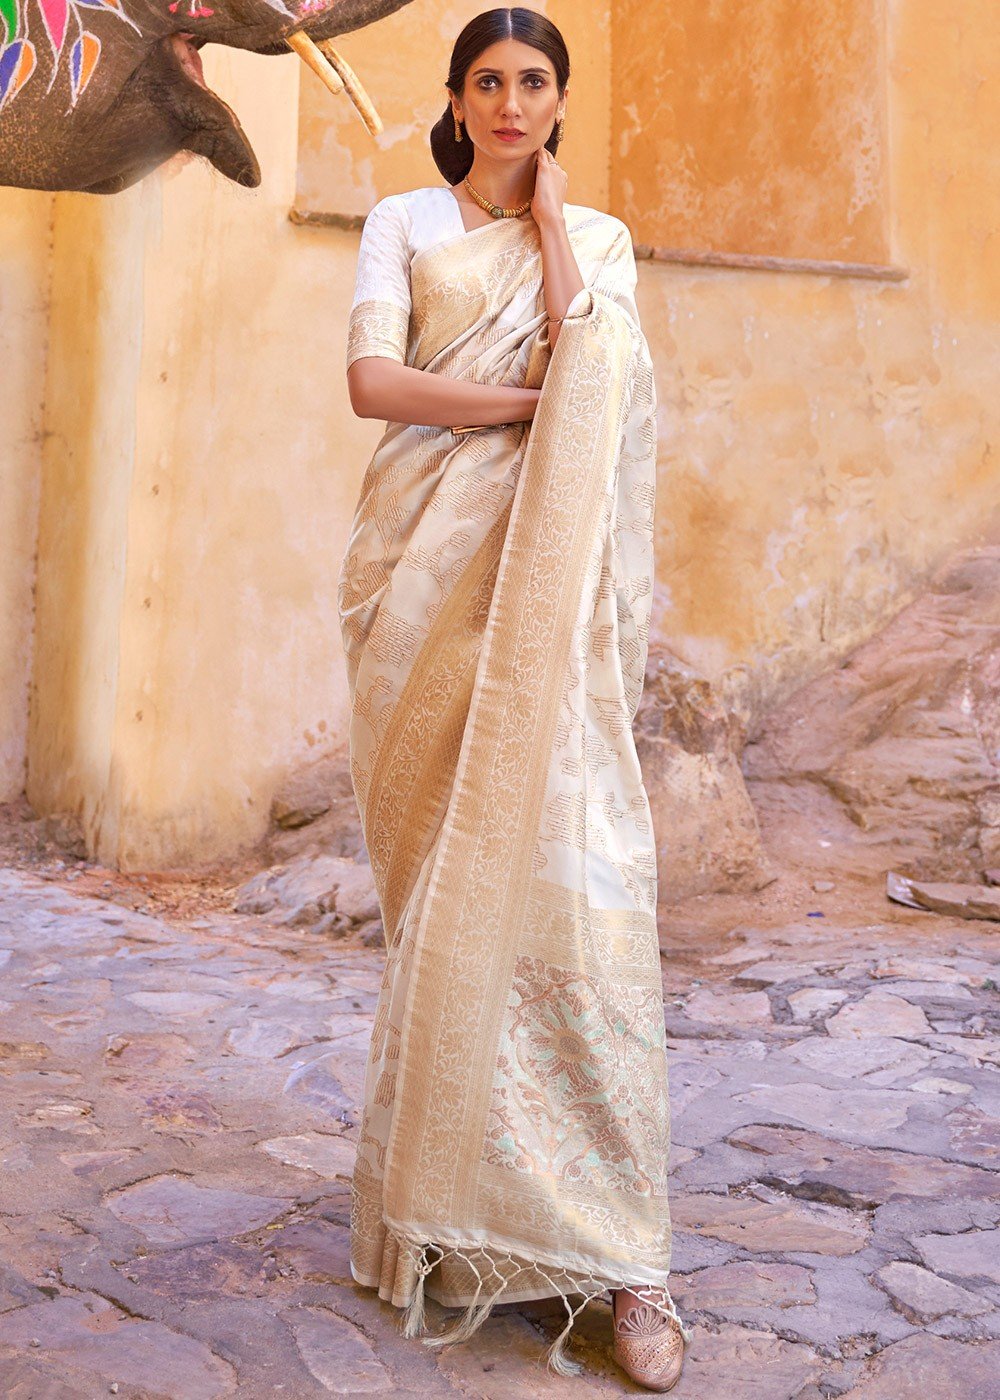 Cotton Sarees in Plain White Or Combination White Shades